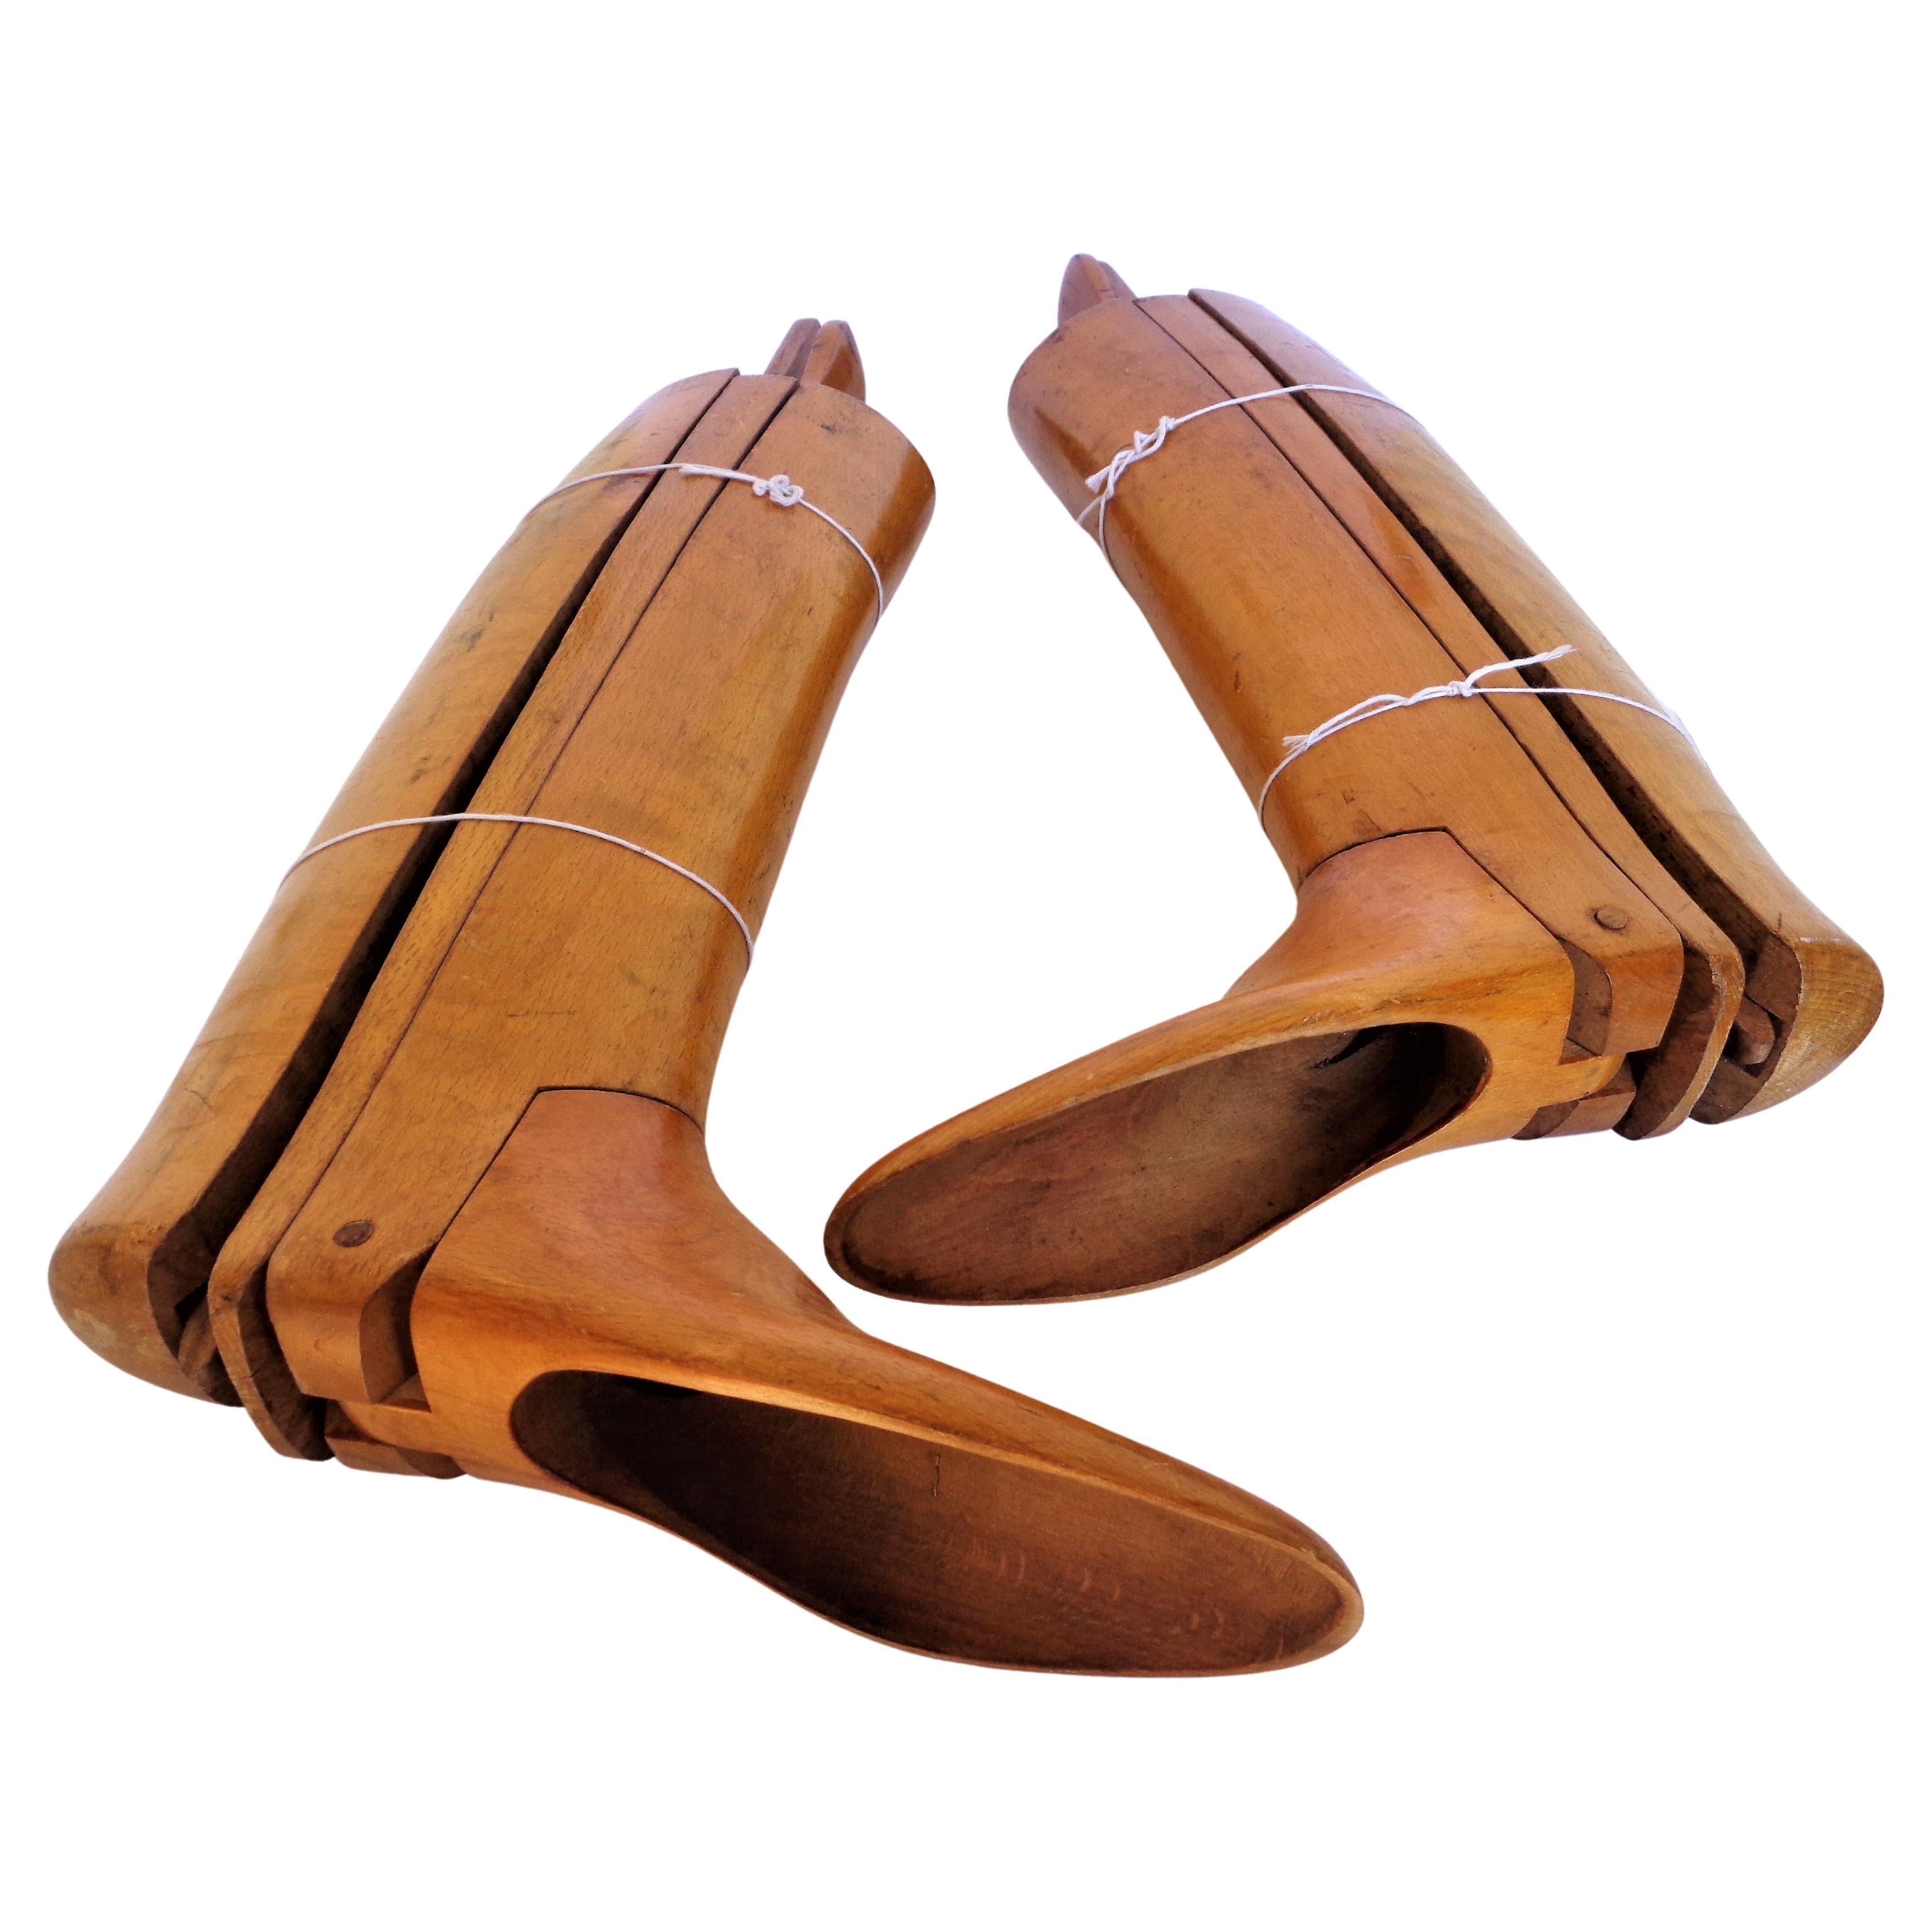 Antique Wood Trees for English Leather Riding Boots